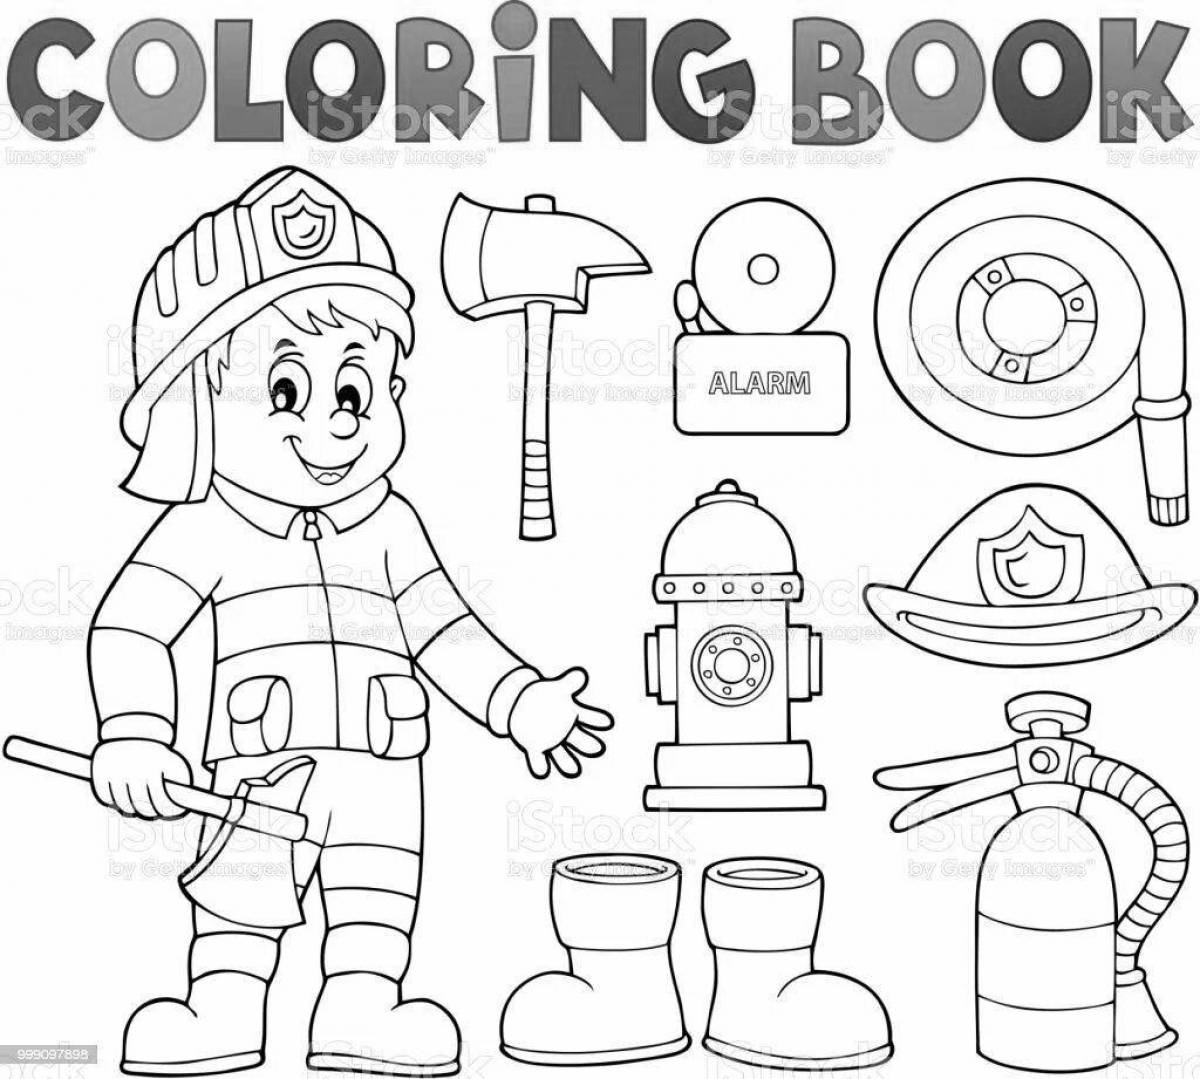 Colorful painted fire shield coloring book